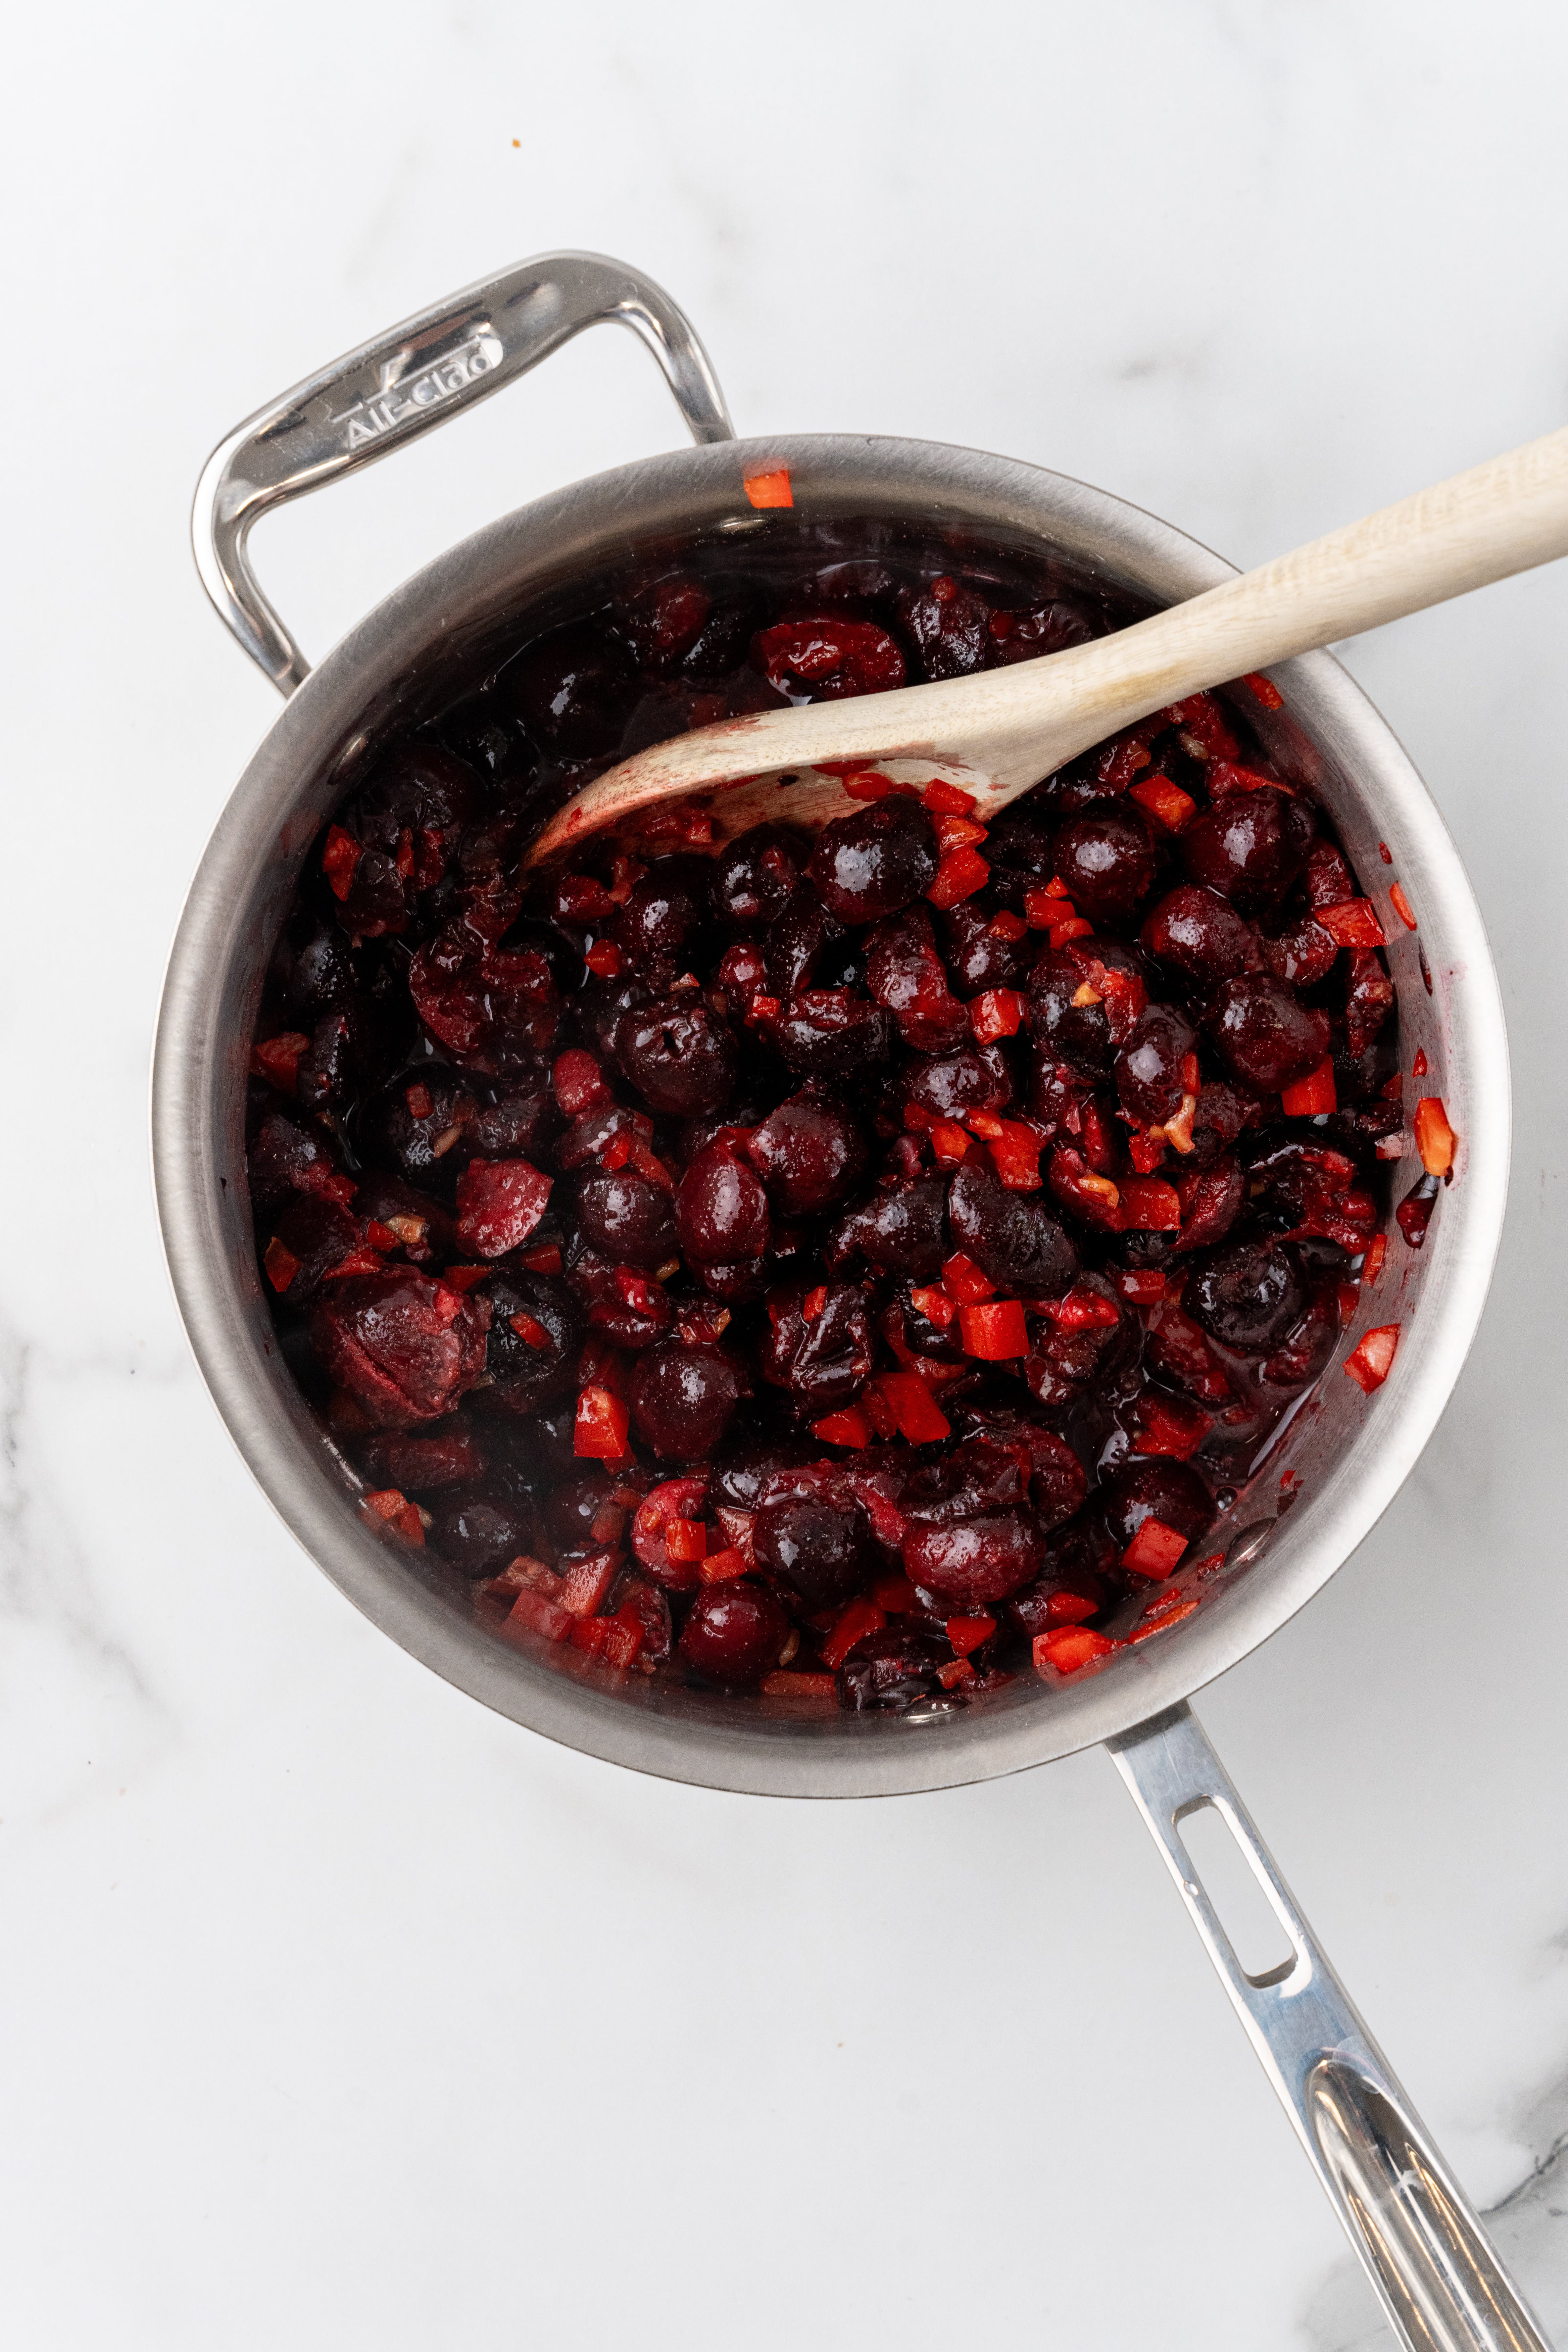 chopped cherries and diced vegetables in a small metal pot